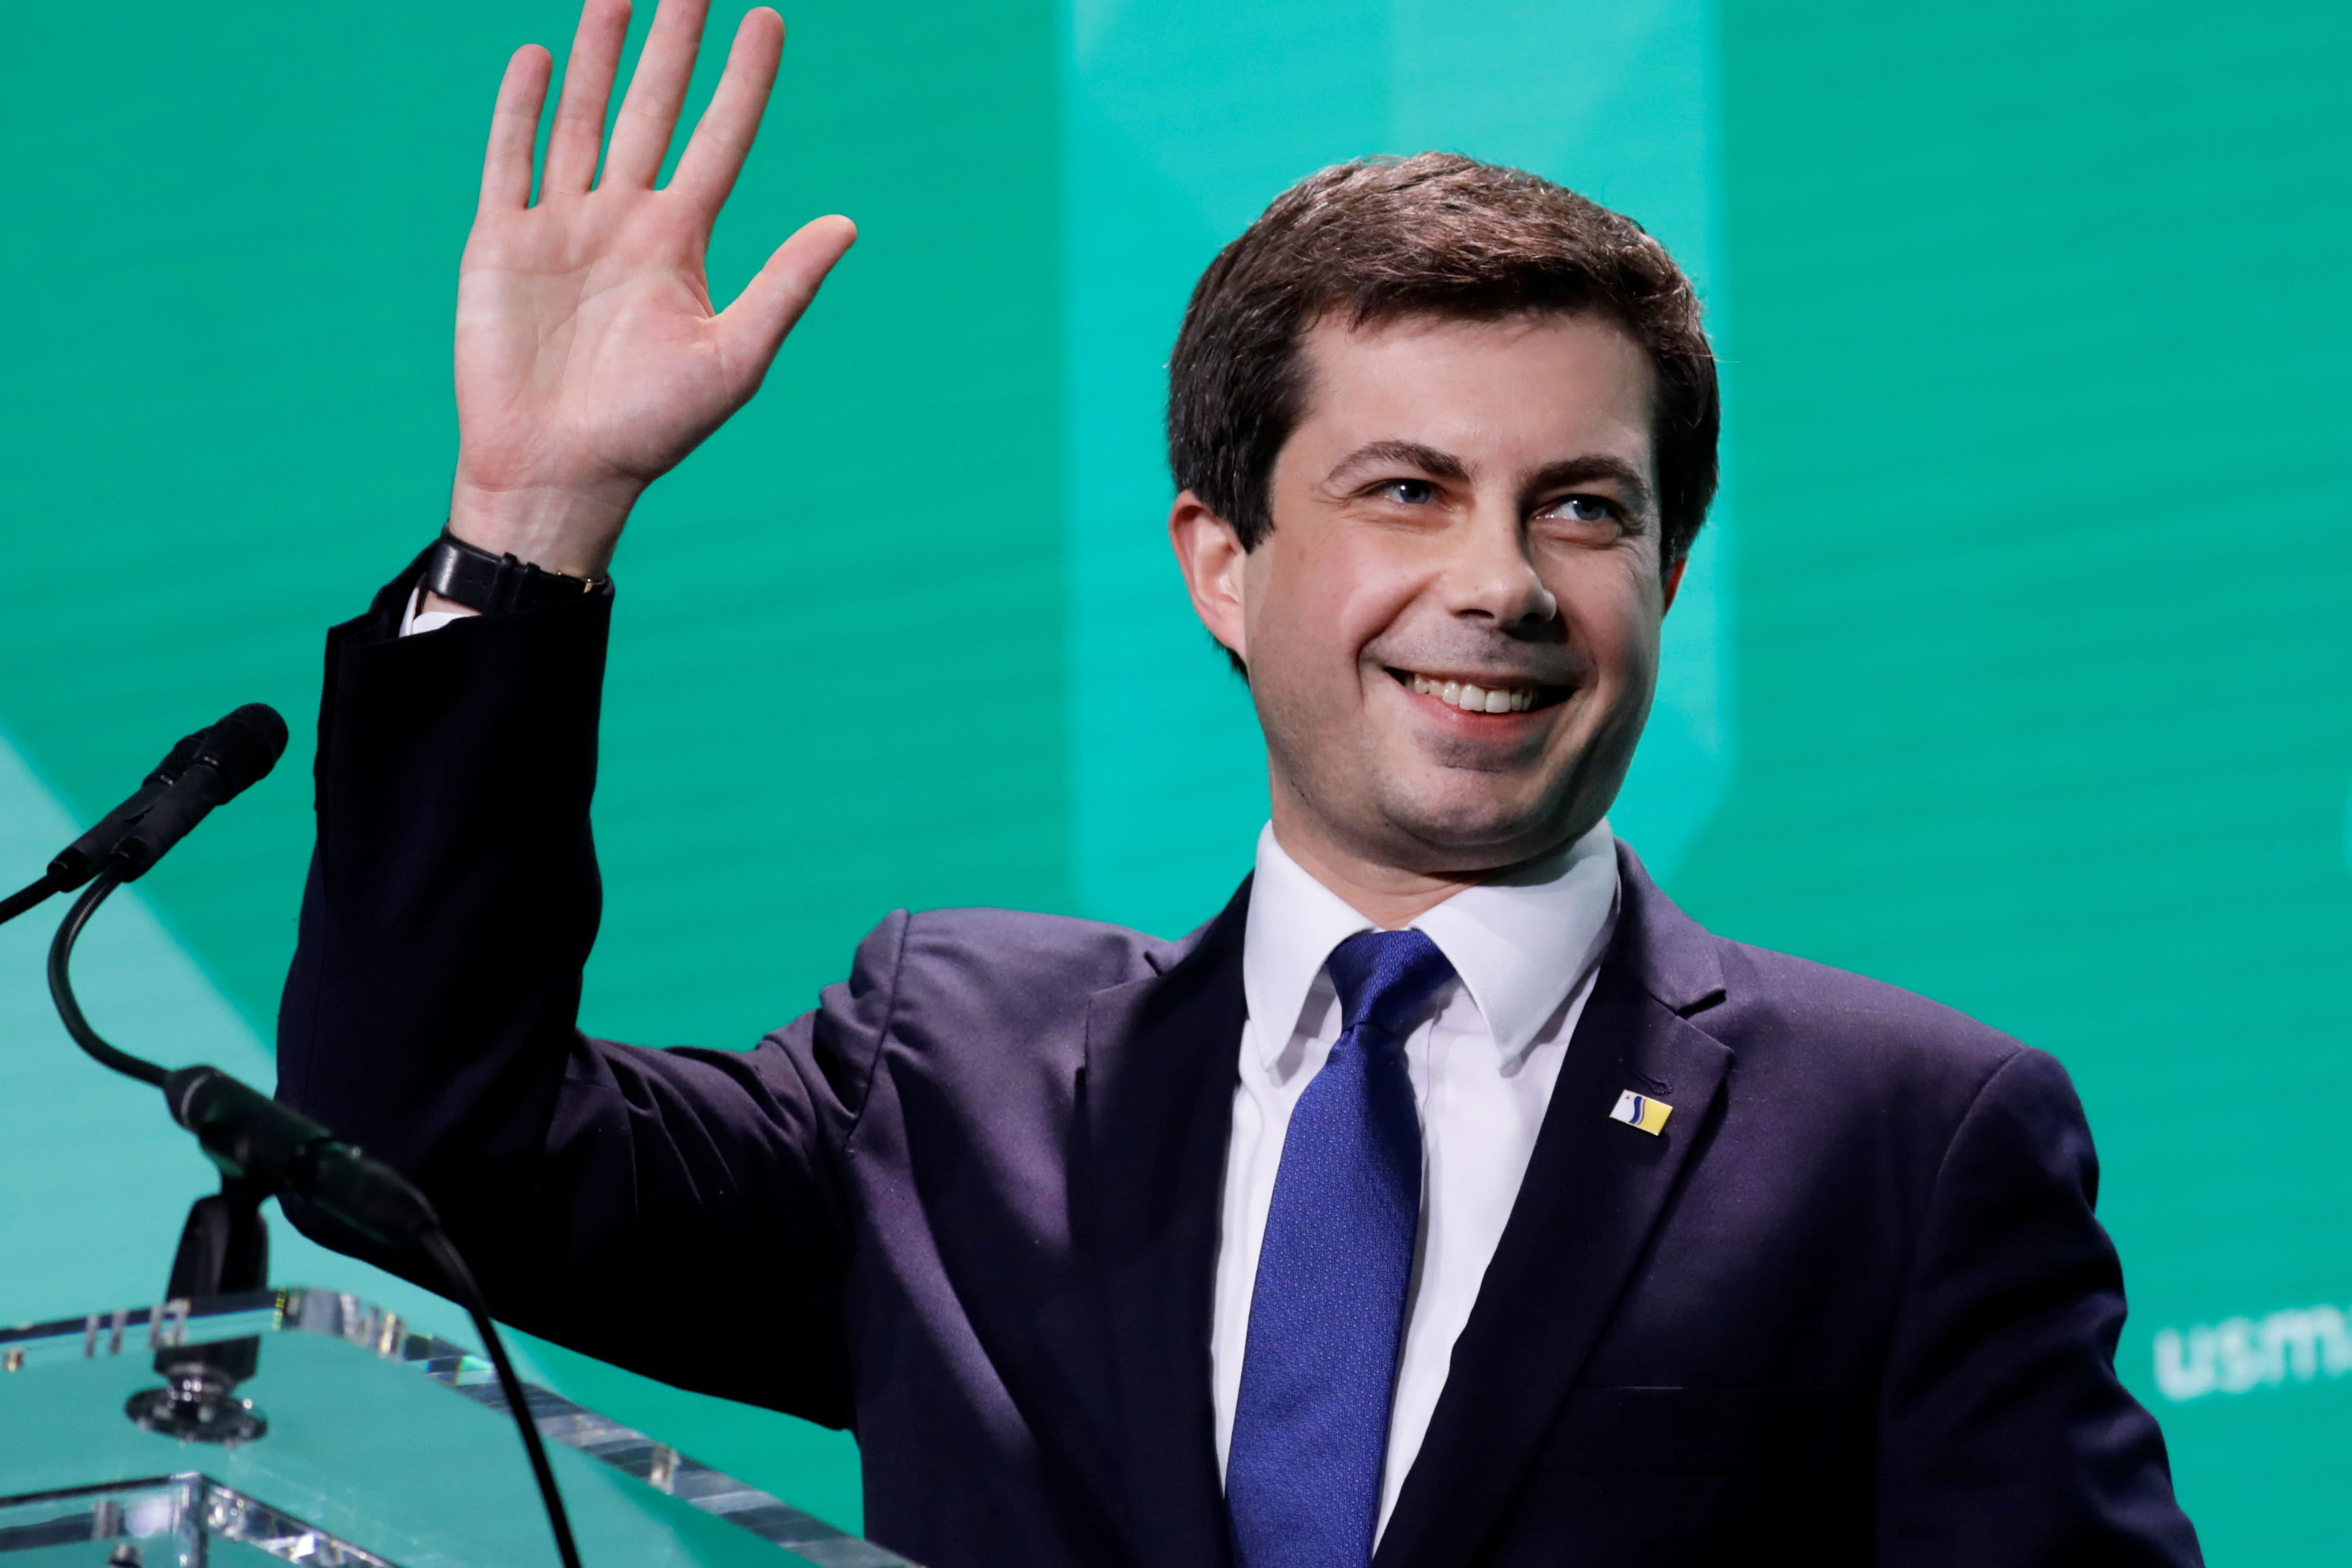 Buttigieg is a gay veteran who wants to take on Trump in 2020